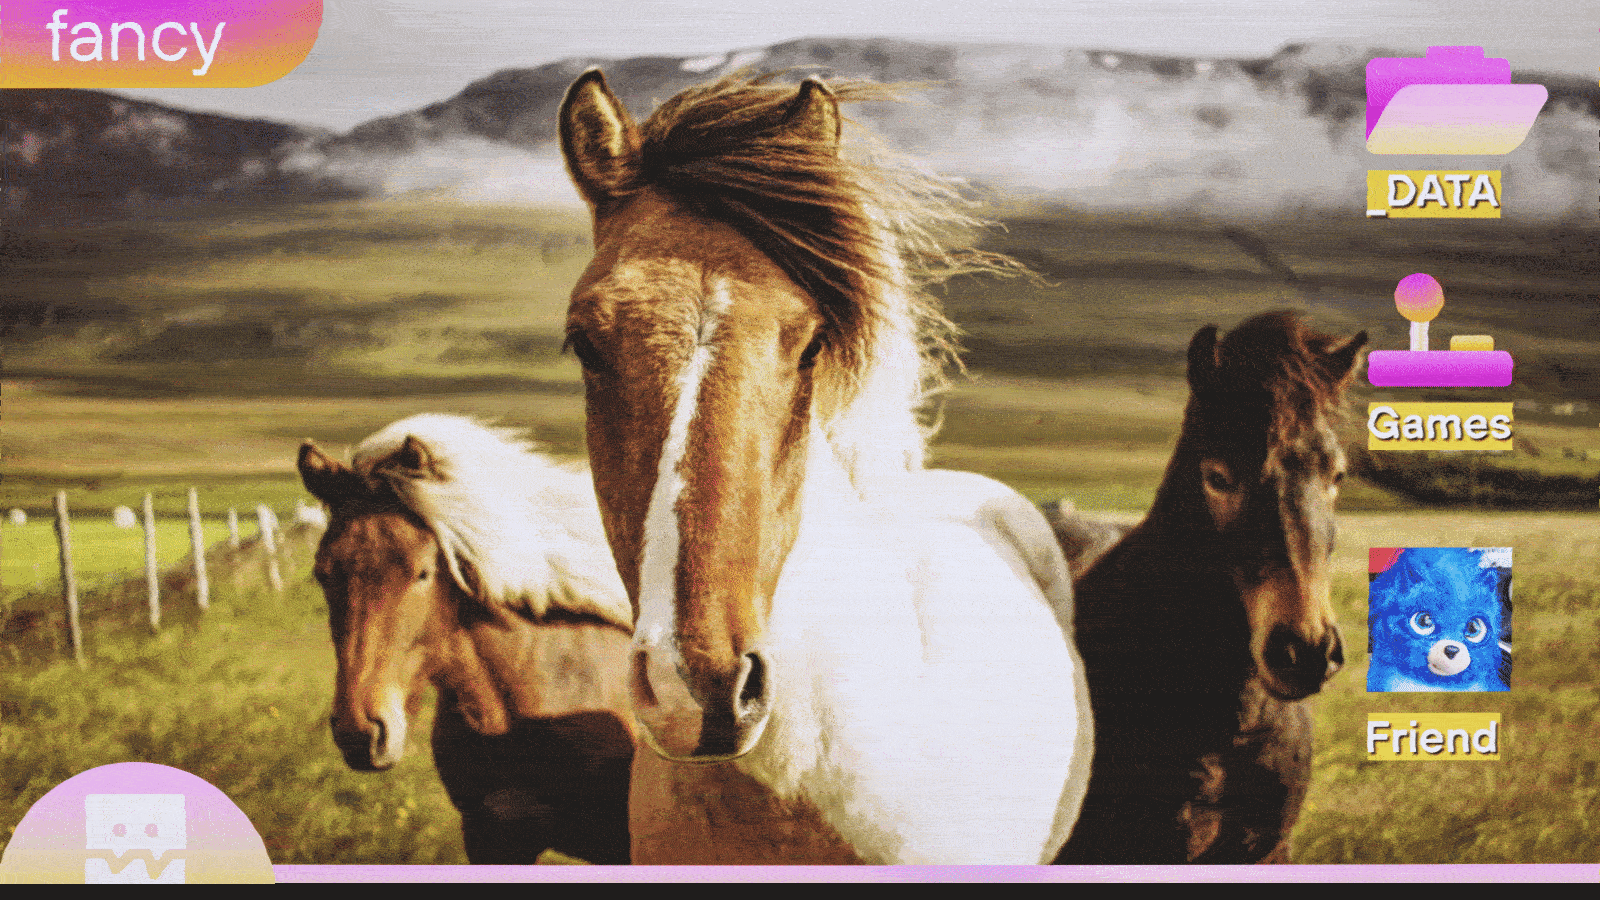 The fictional desktop of the Fanbyte mascot, Fancy. It has a background image of majestic horses.